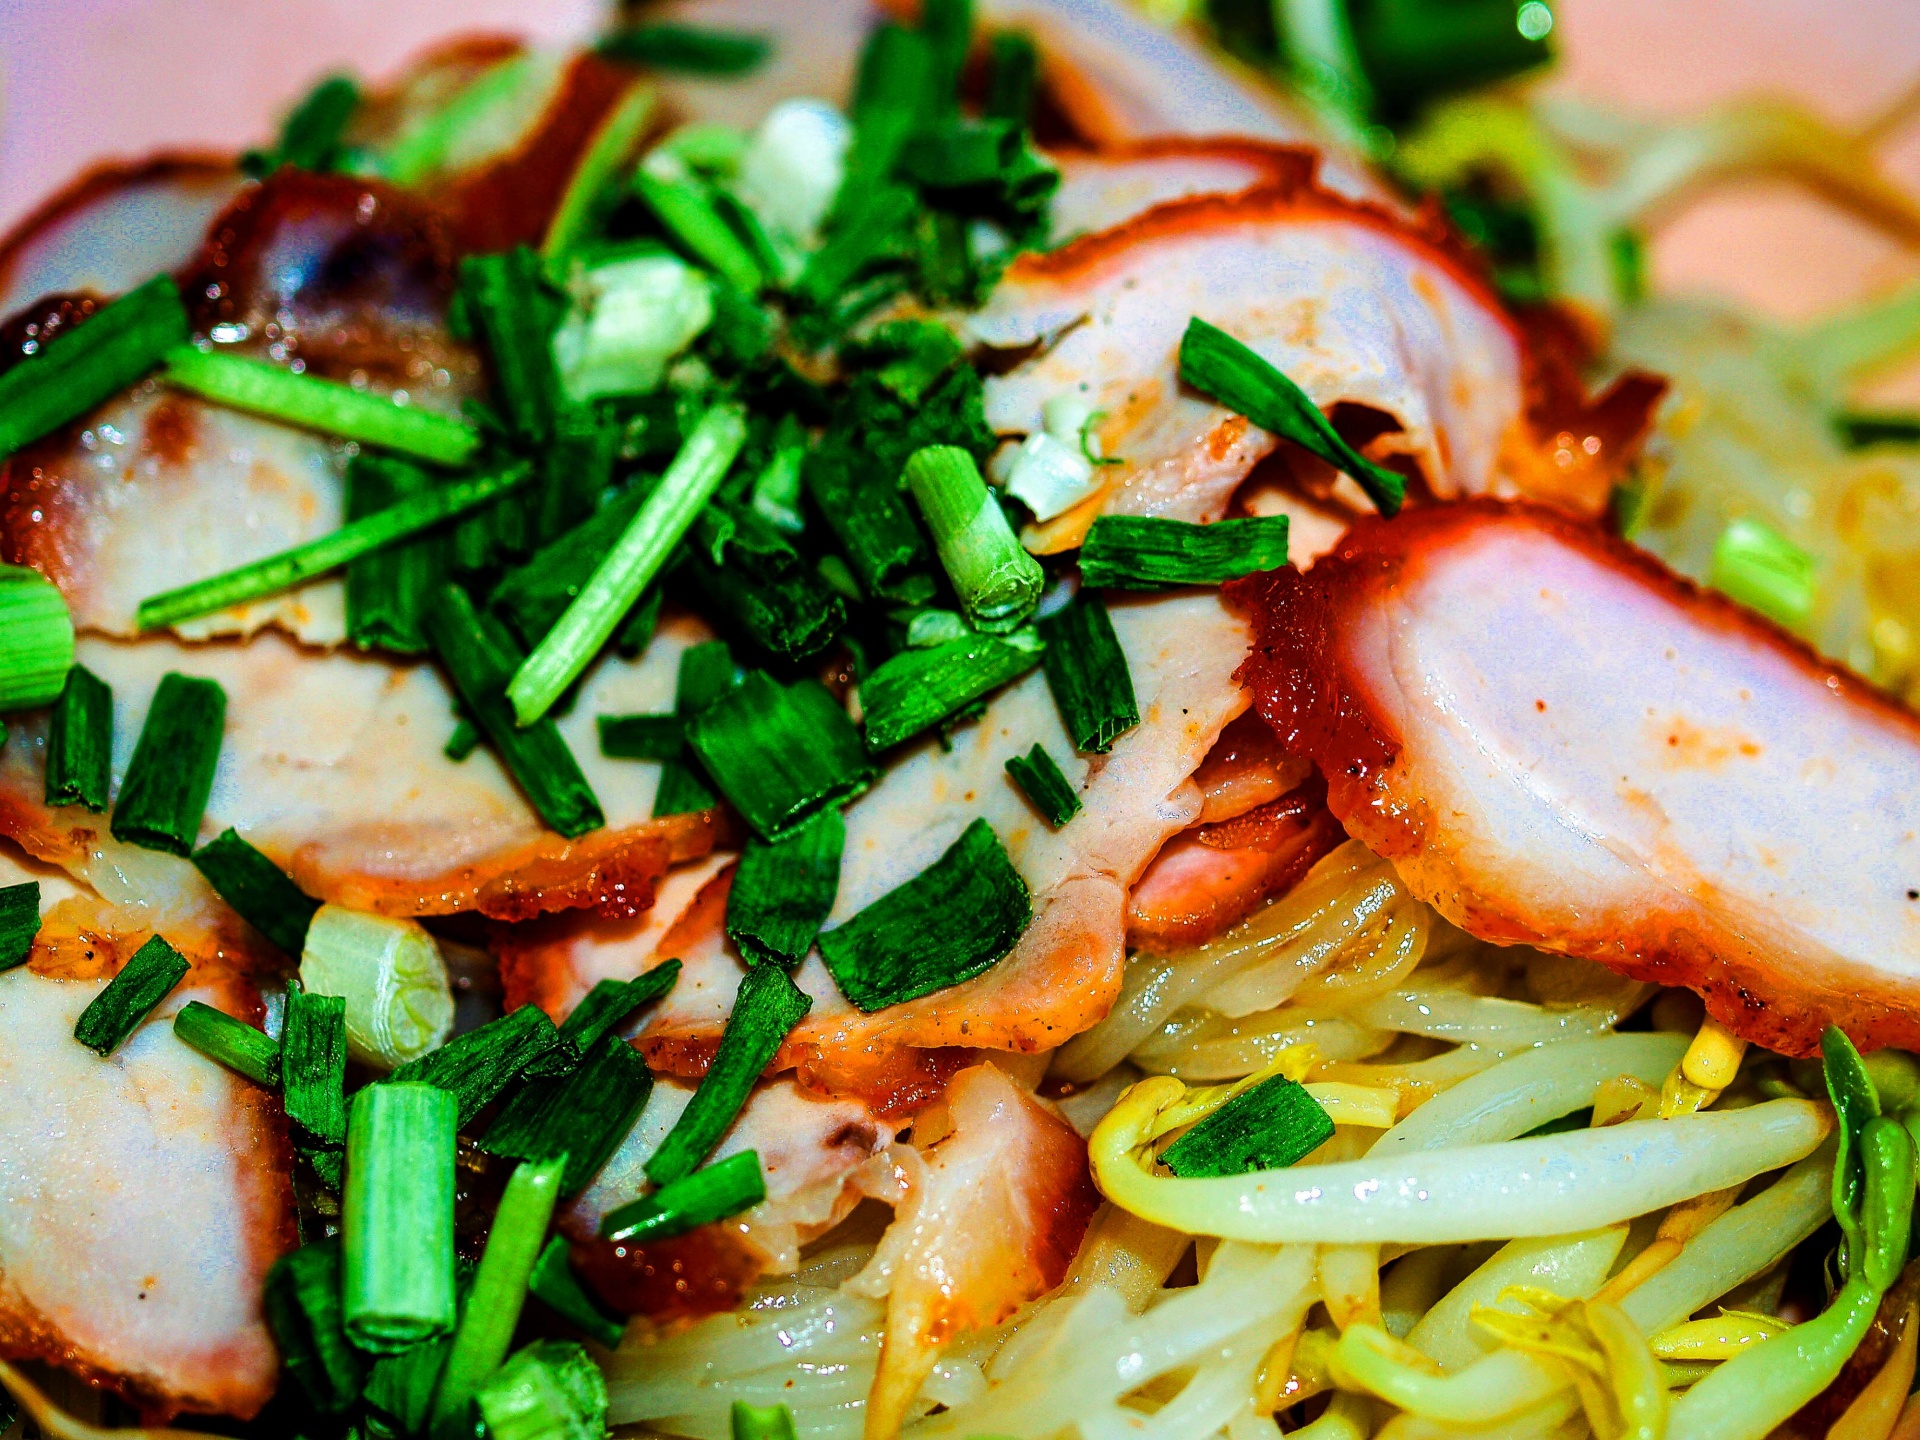 Thai Food Noodles With Vegetables, Meats